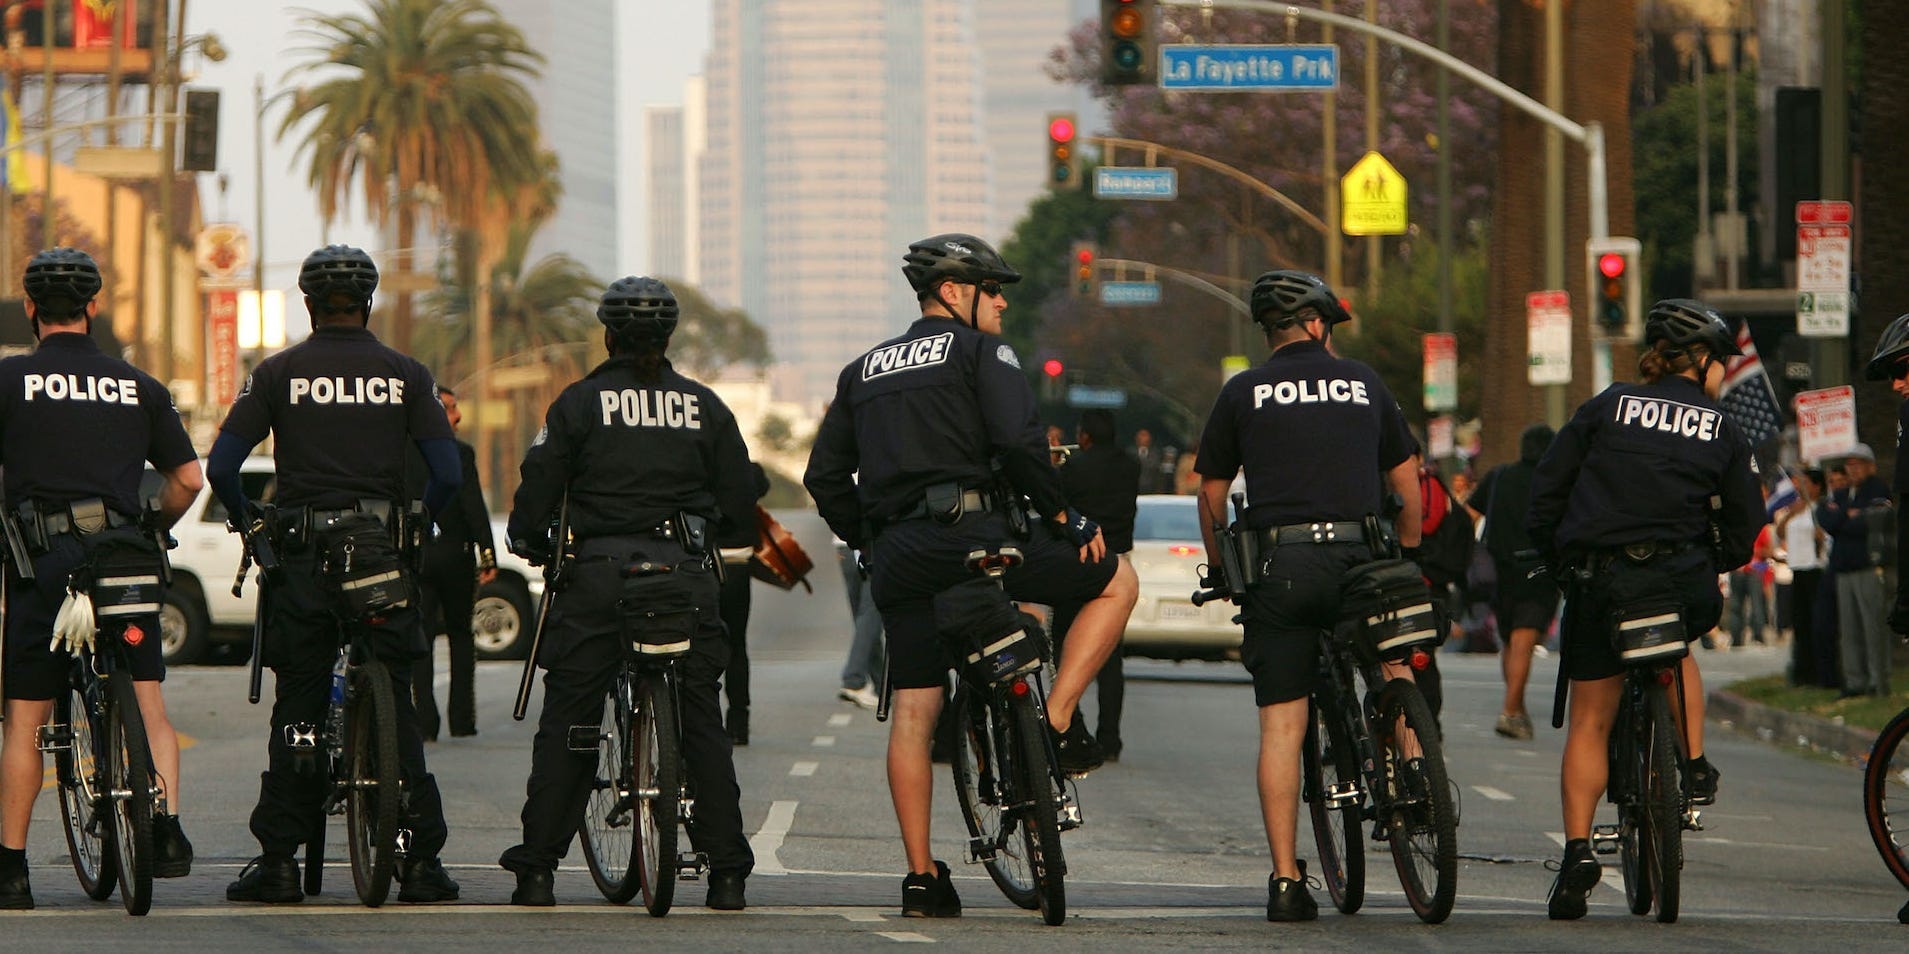 Los Angeles Police Department officers on bikes on a street